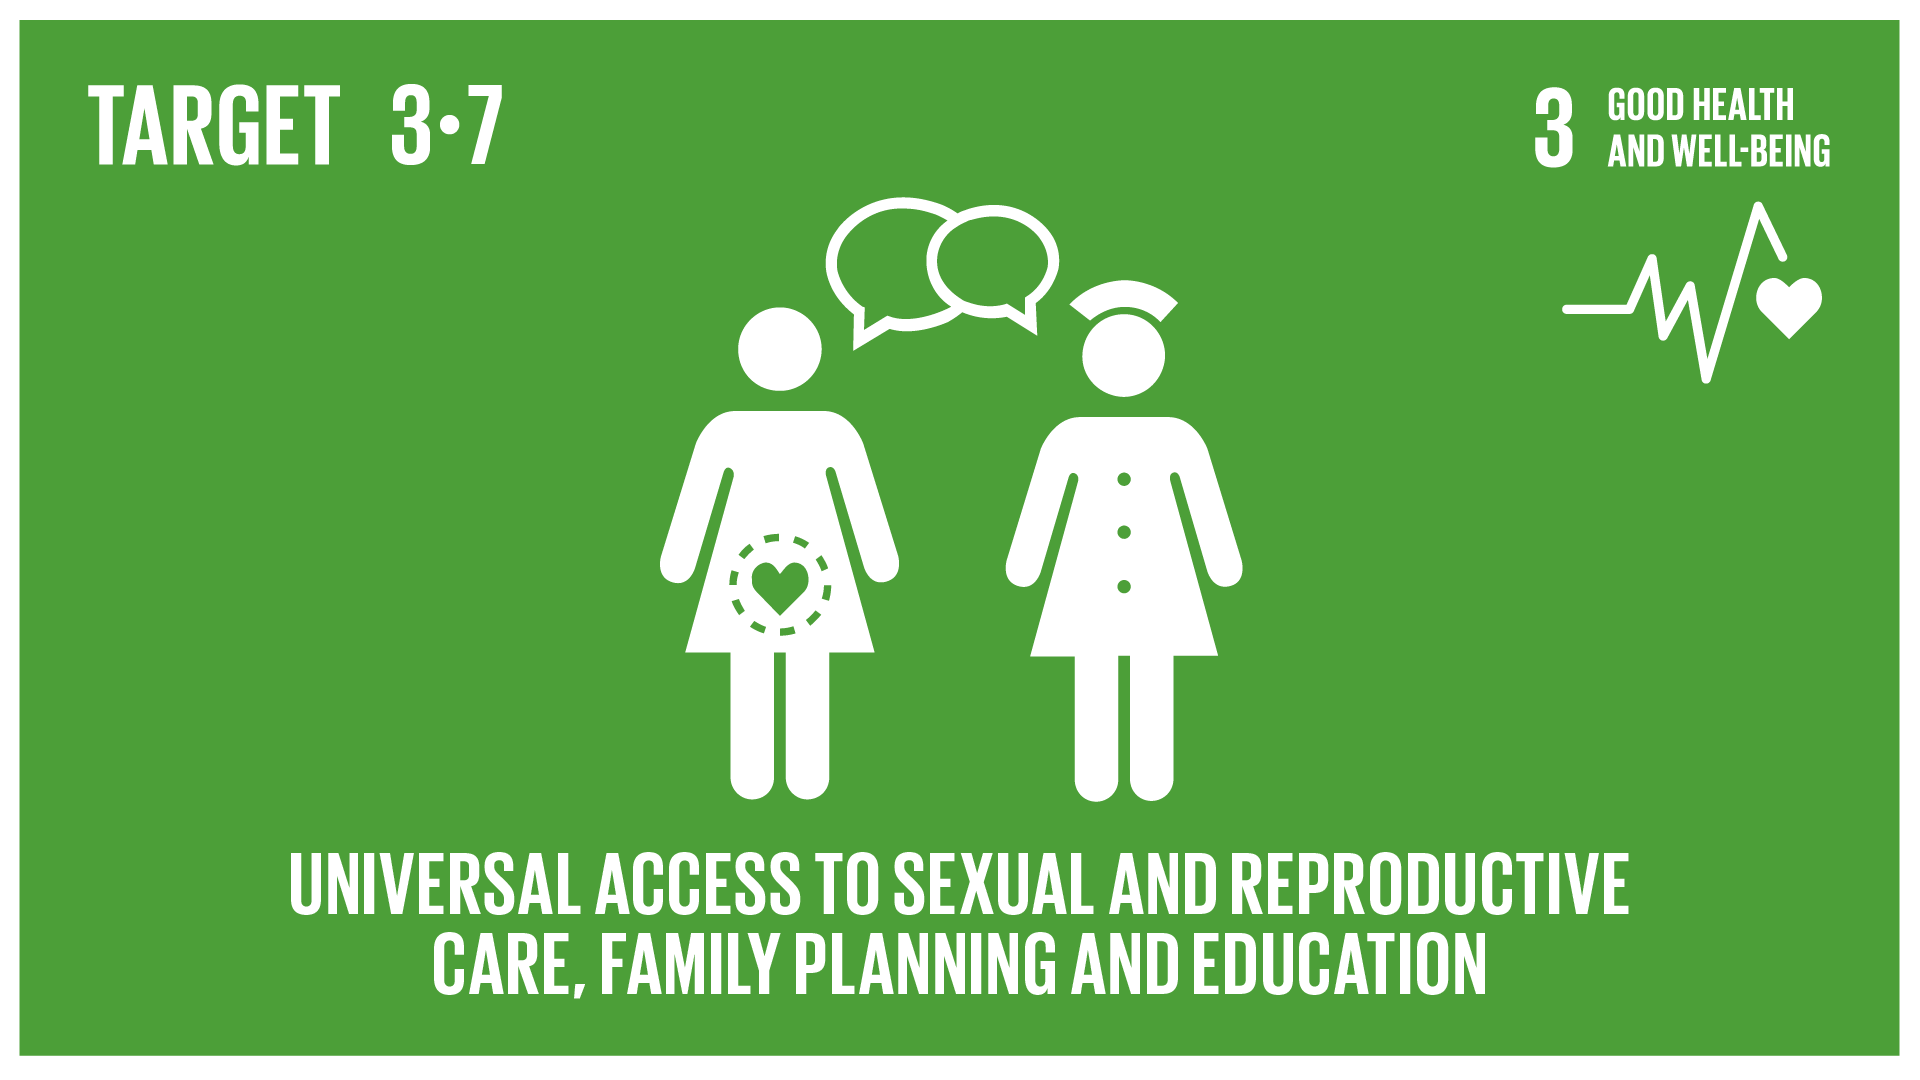 Graphic displaying the universal access to sexual and reproductive health-care services